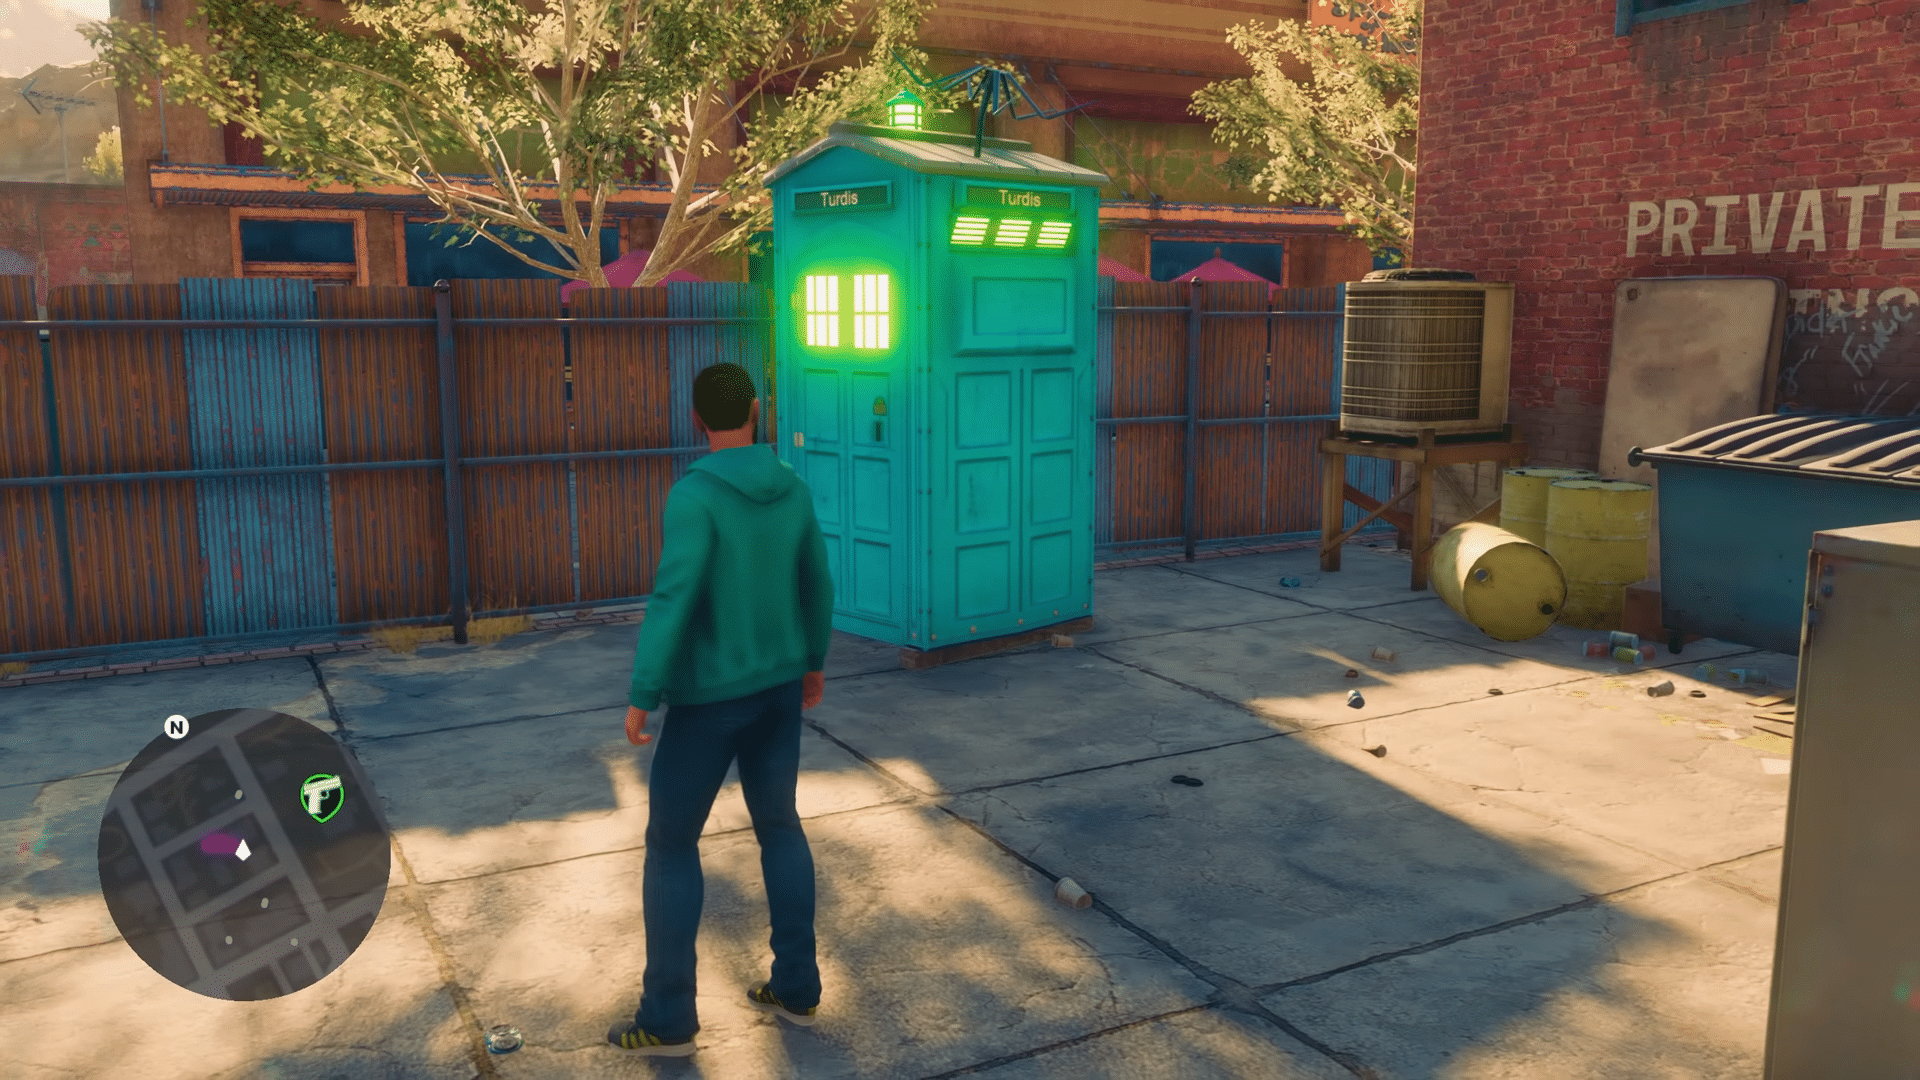 Doctor Who's Tardis - or Turdis - can be found in the game